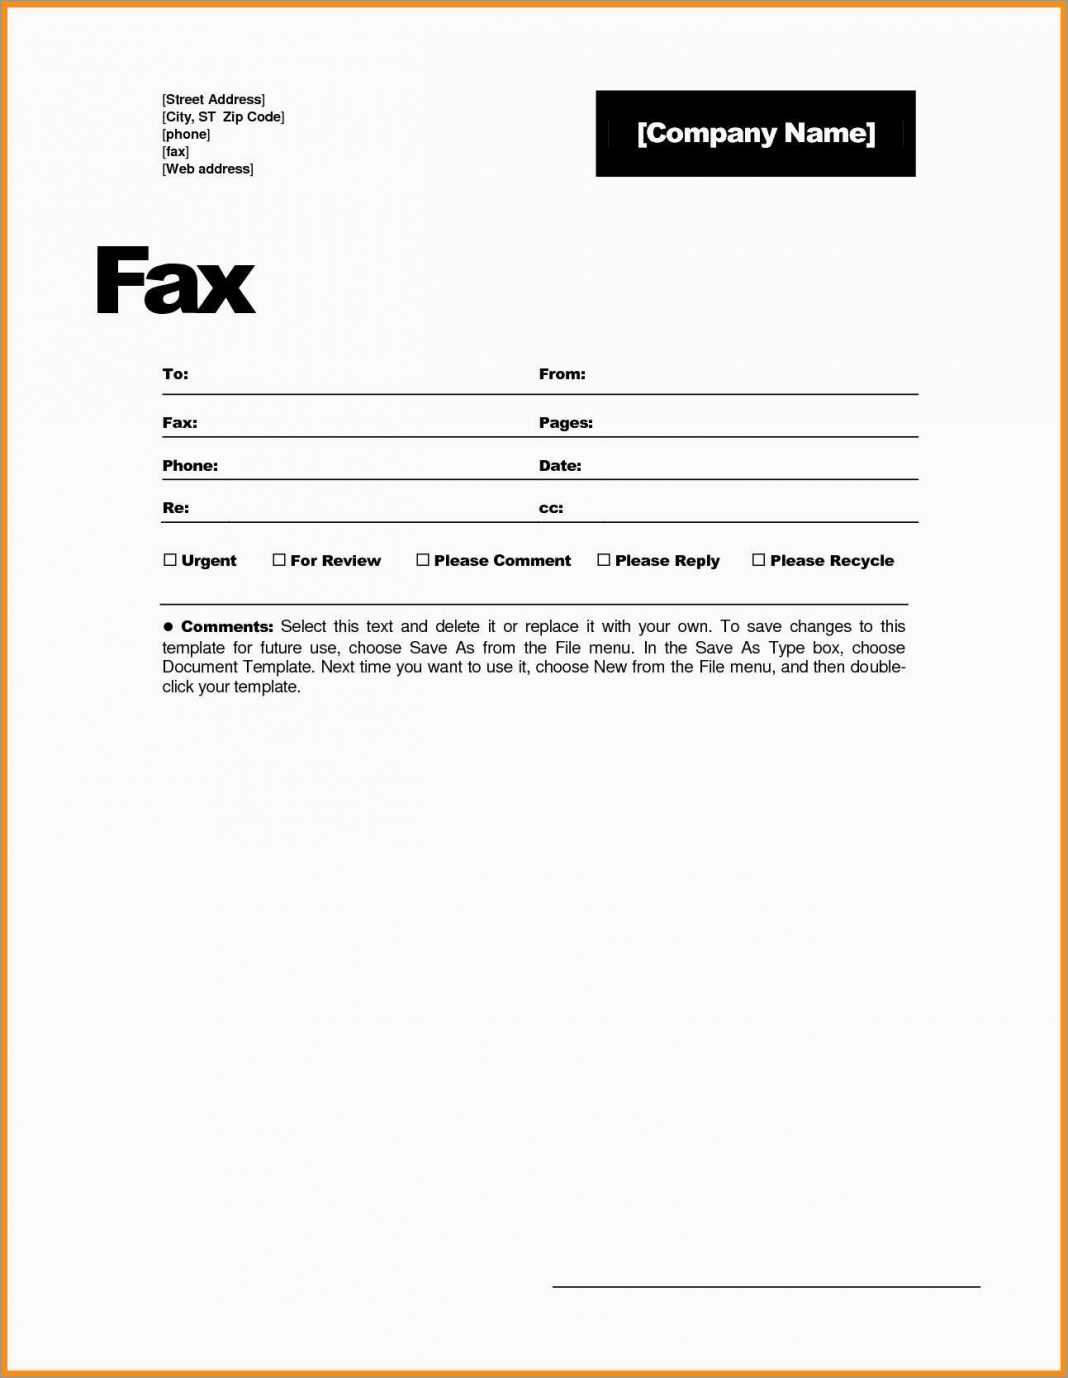 Fax Cover Sheet Plate Word Spreadsheet Examples Page Free With Fax Cover Sheet Template Word 2010